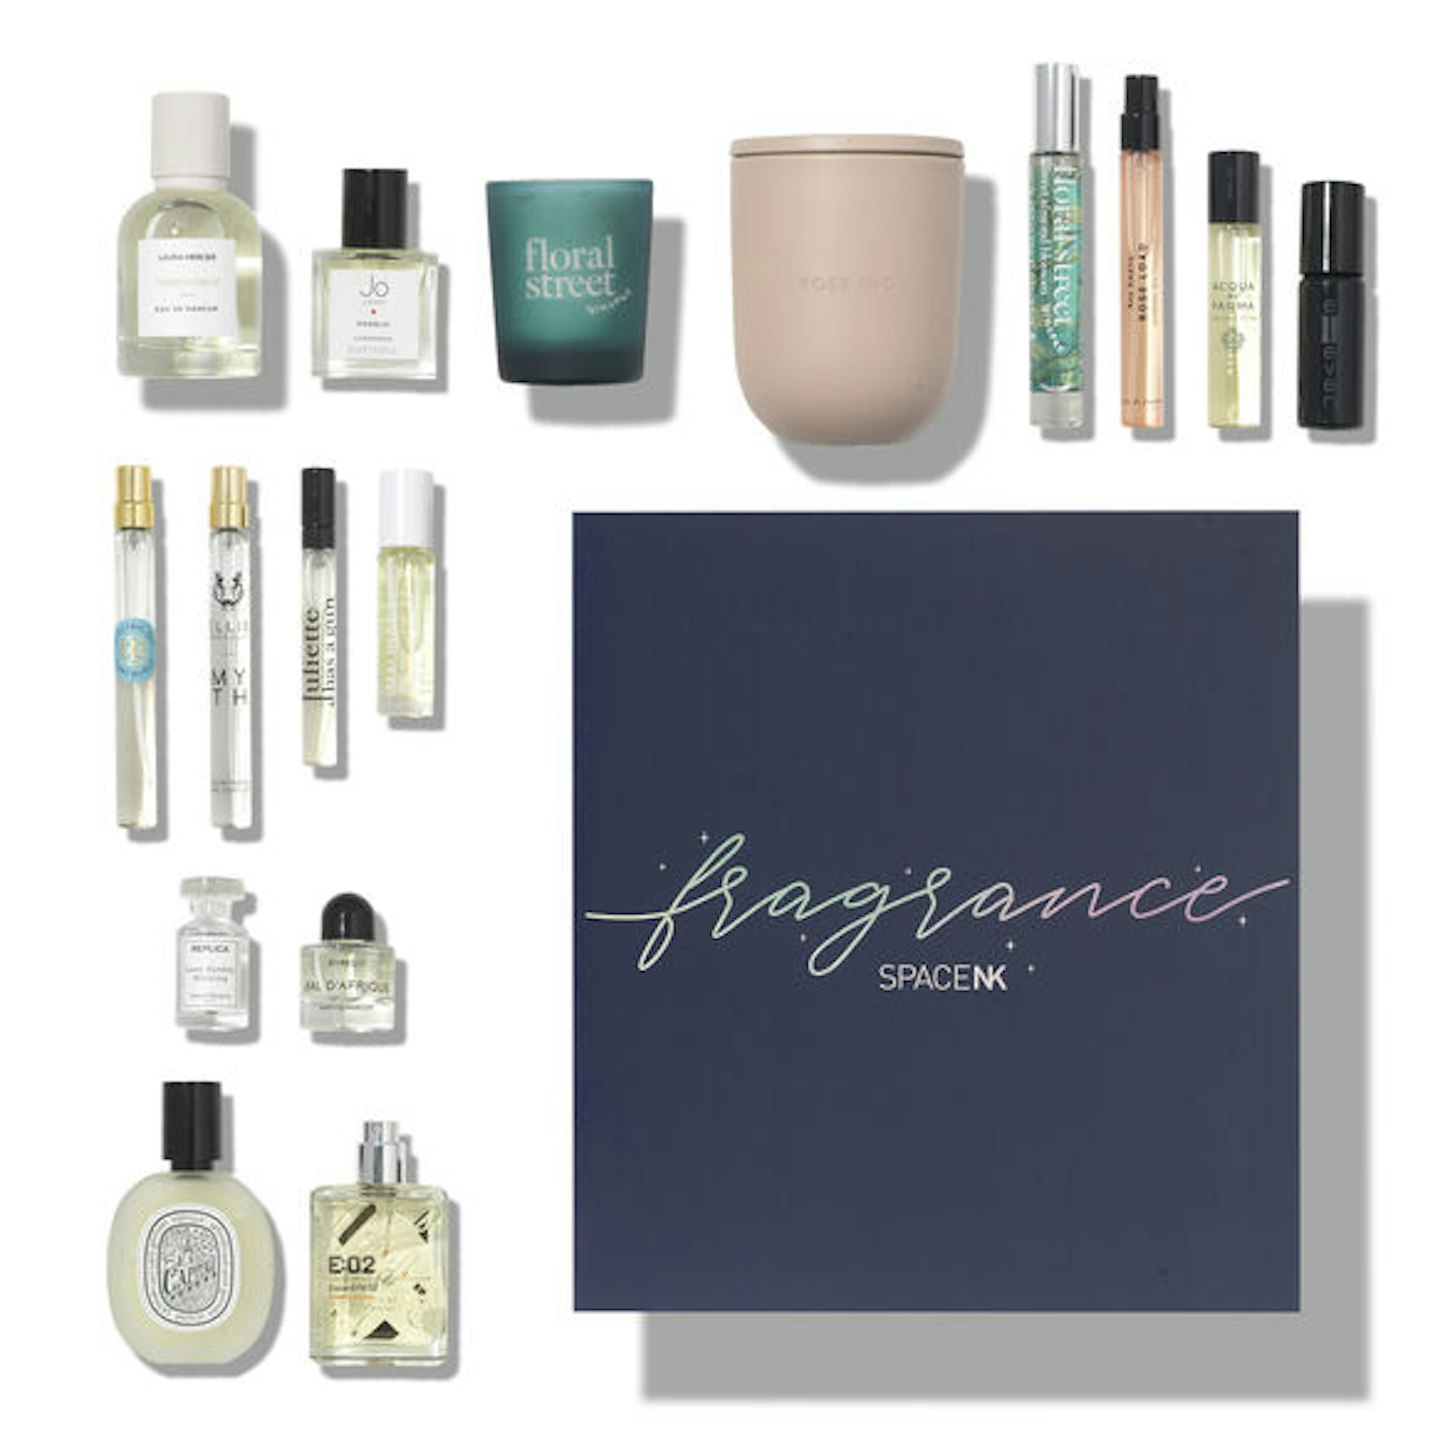 Space NK Perfume Advent Calendar Is On Sale For Black Friday